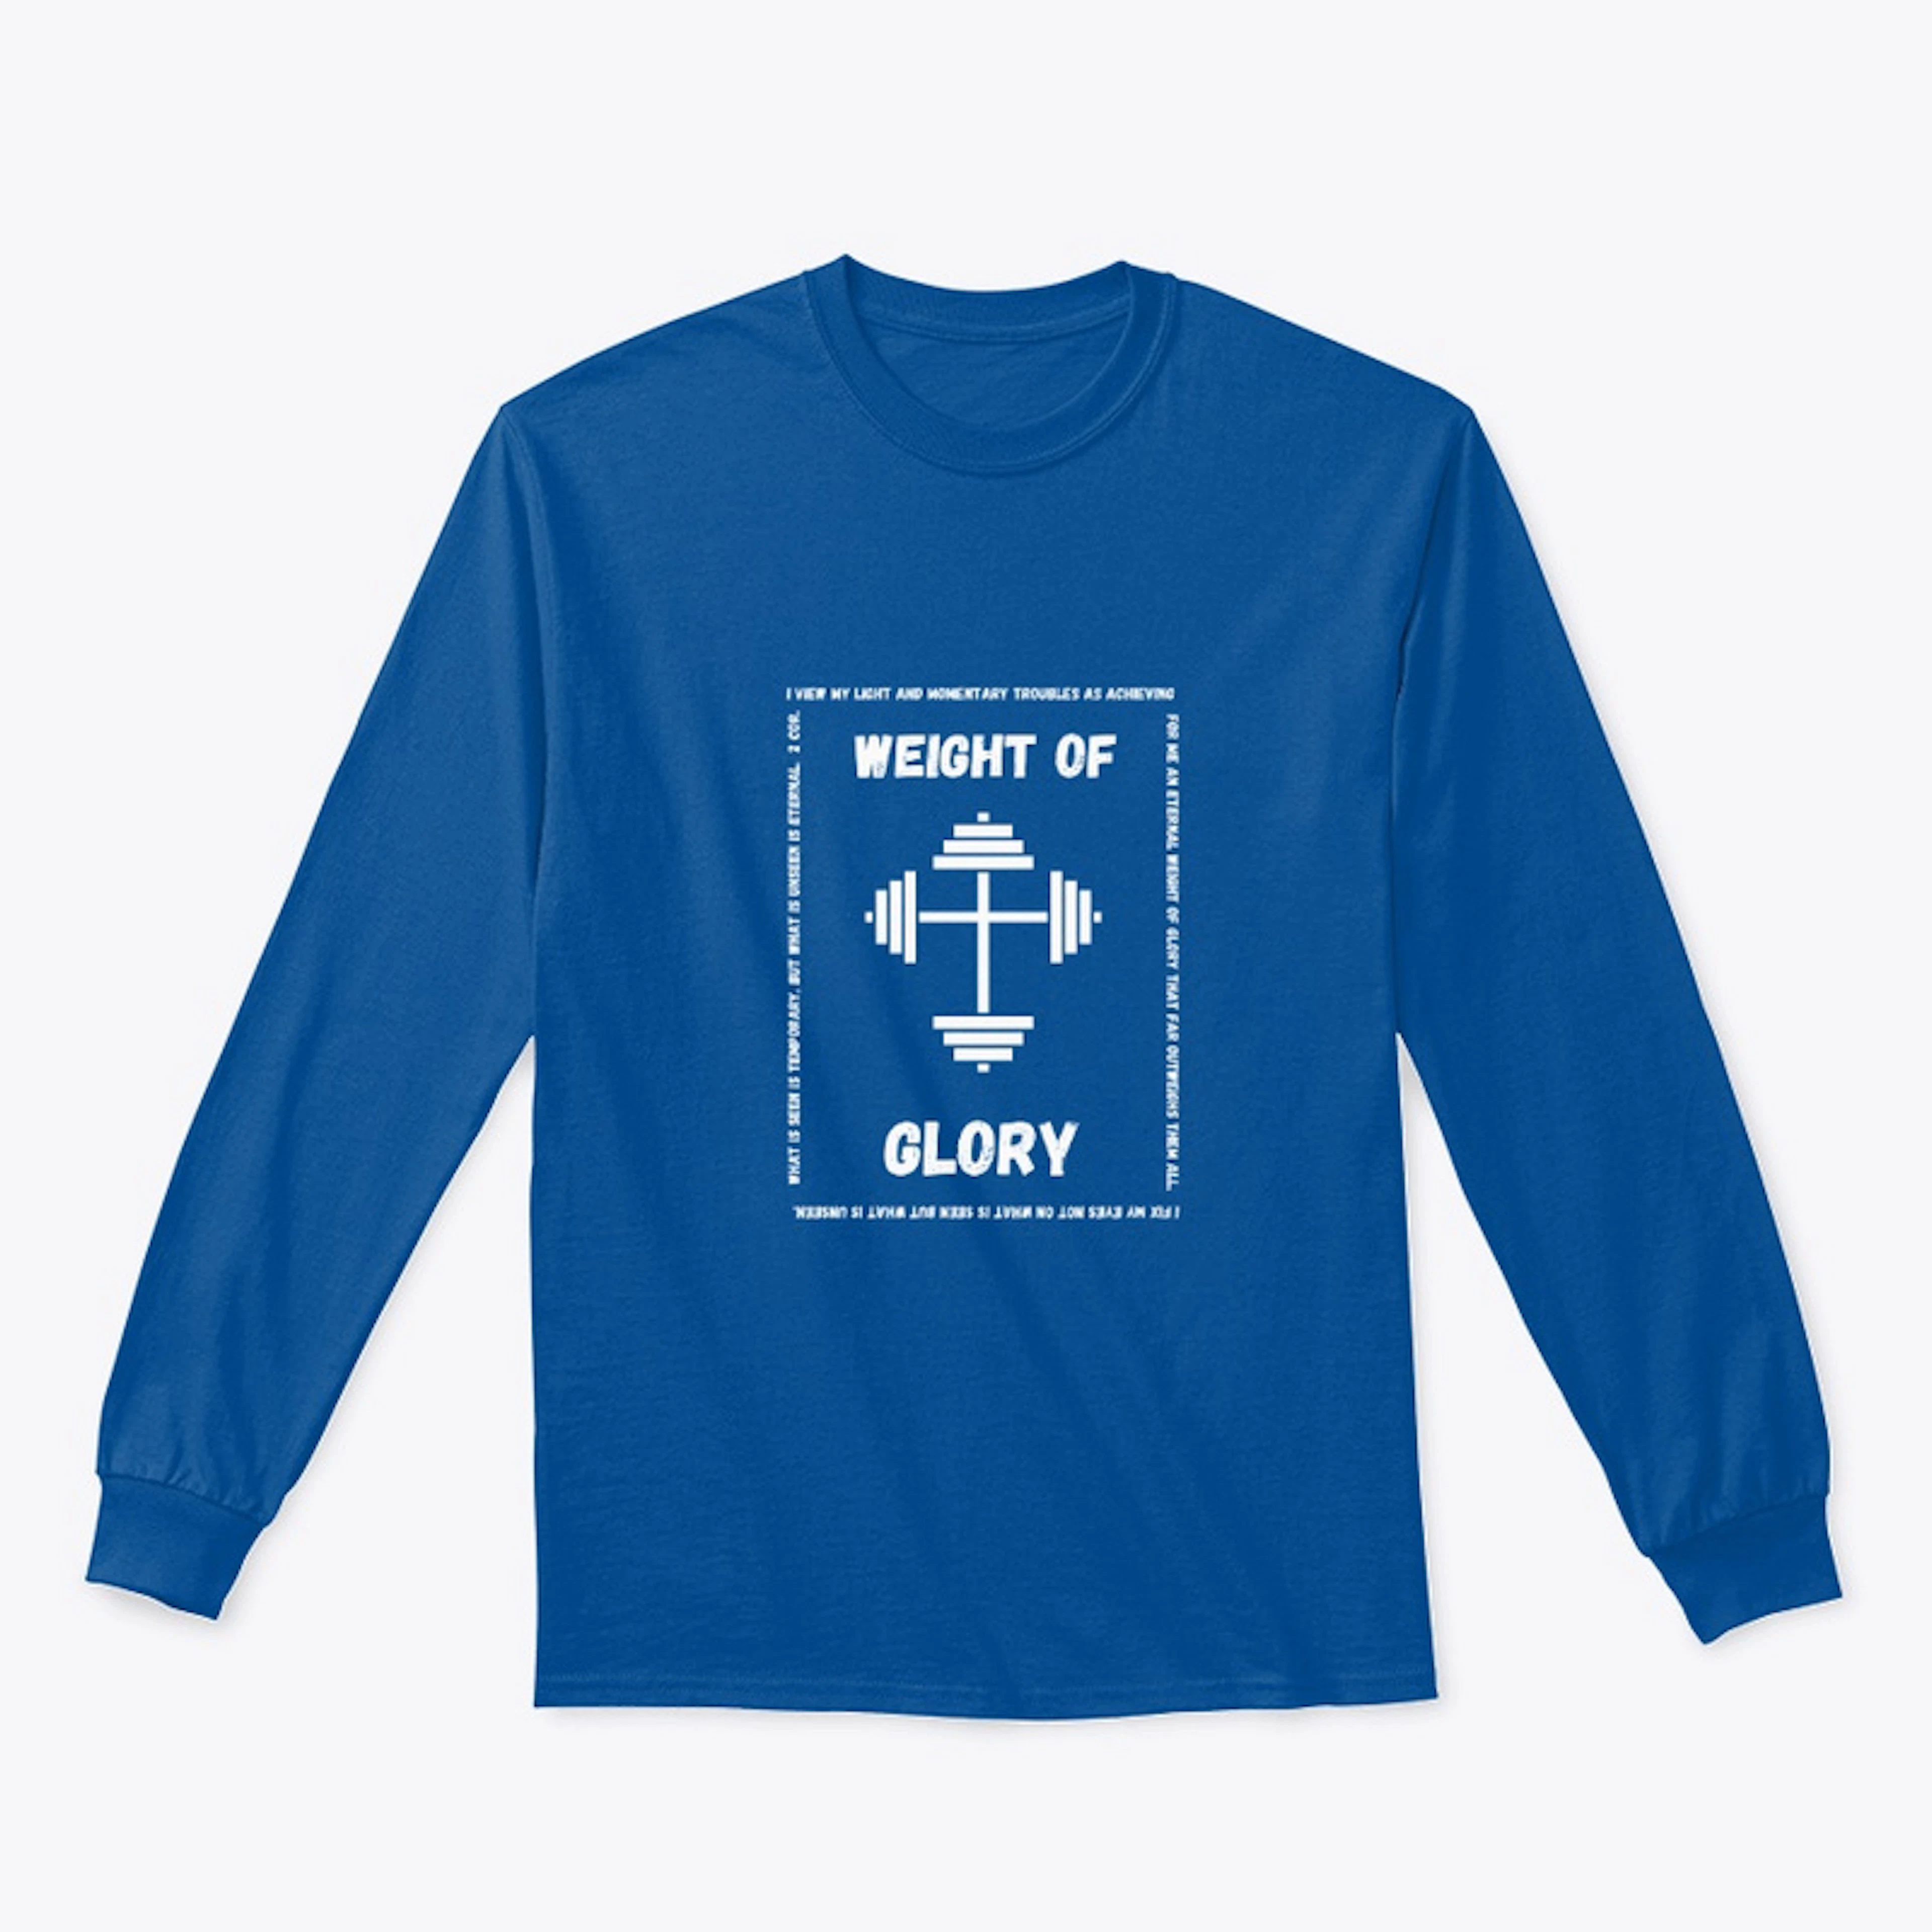 Weight of Glory Apparel